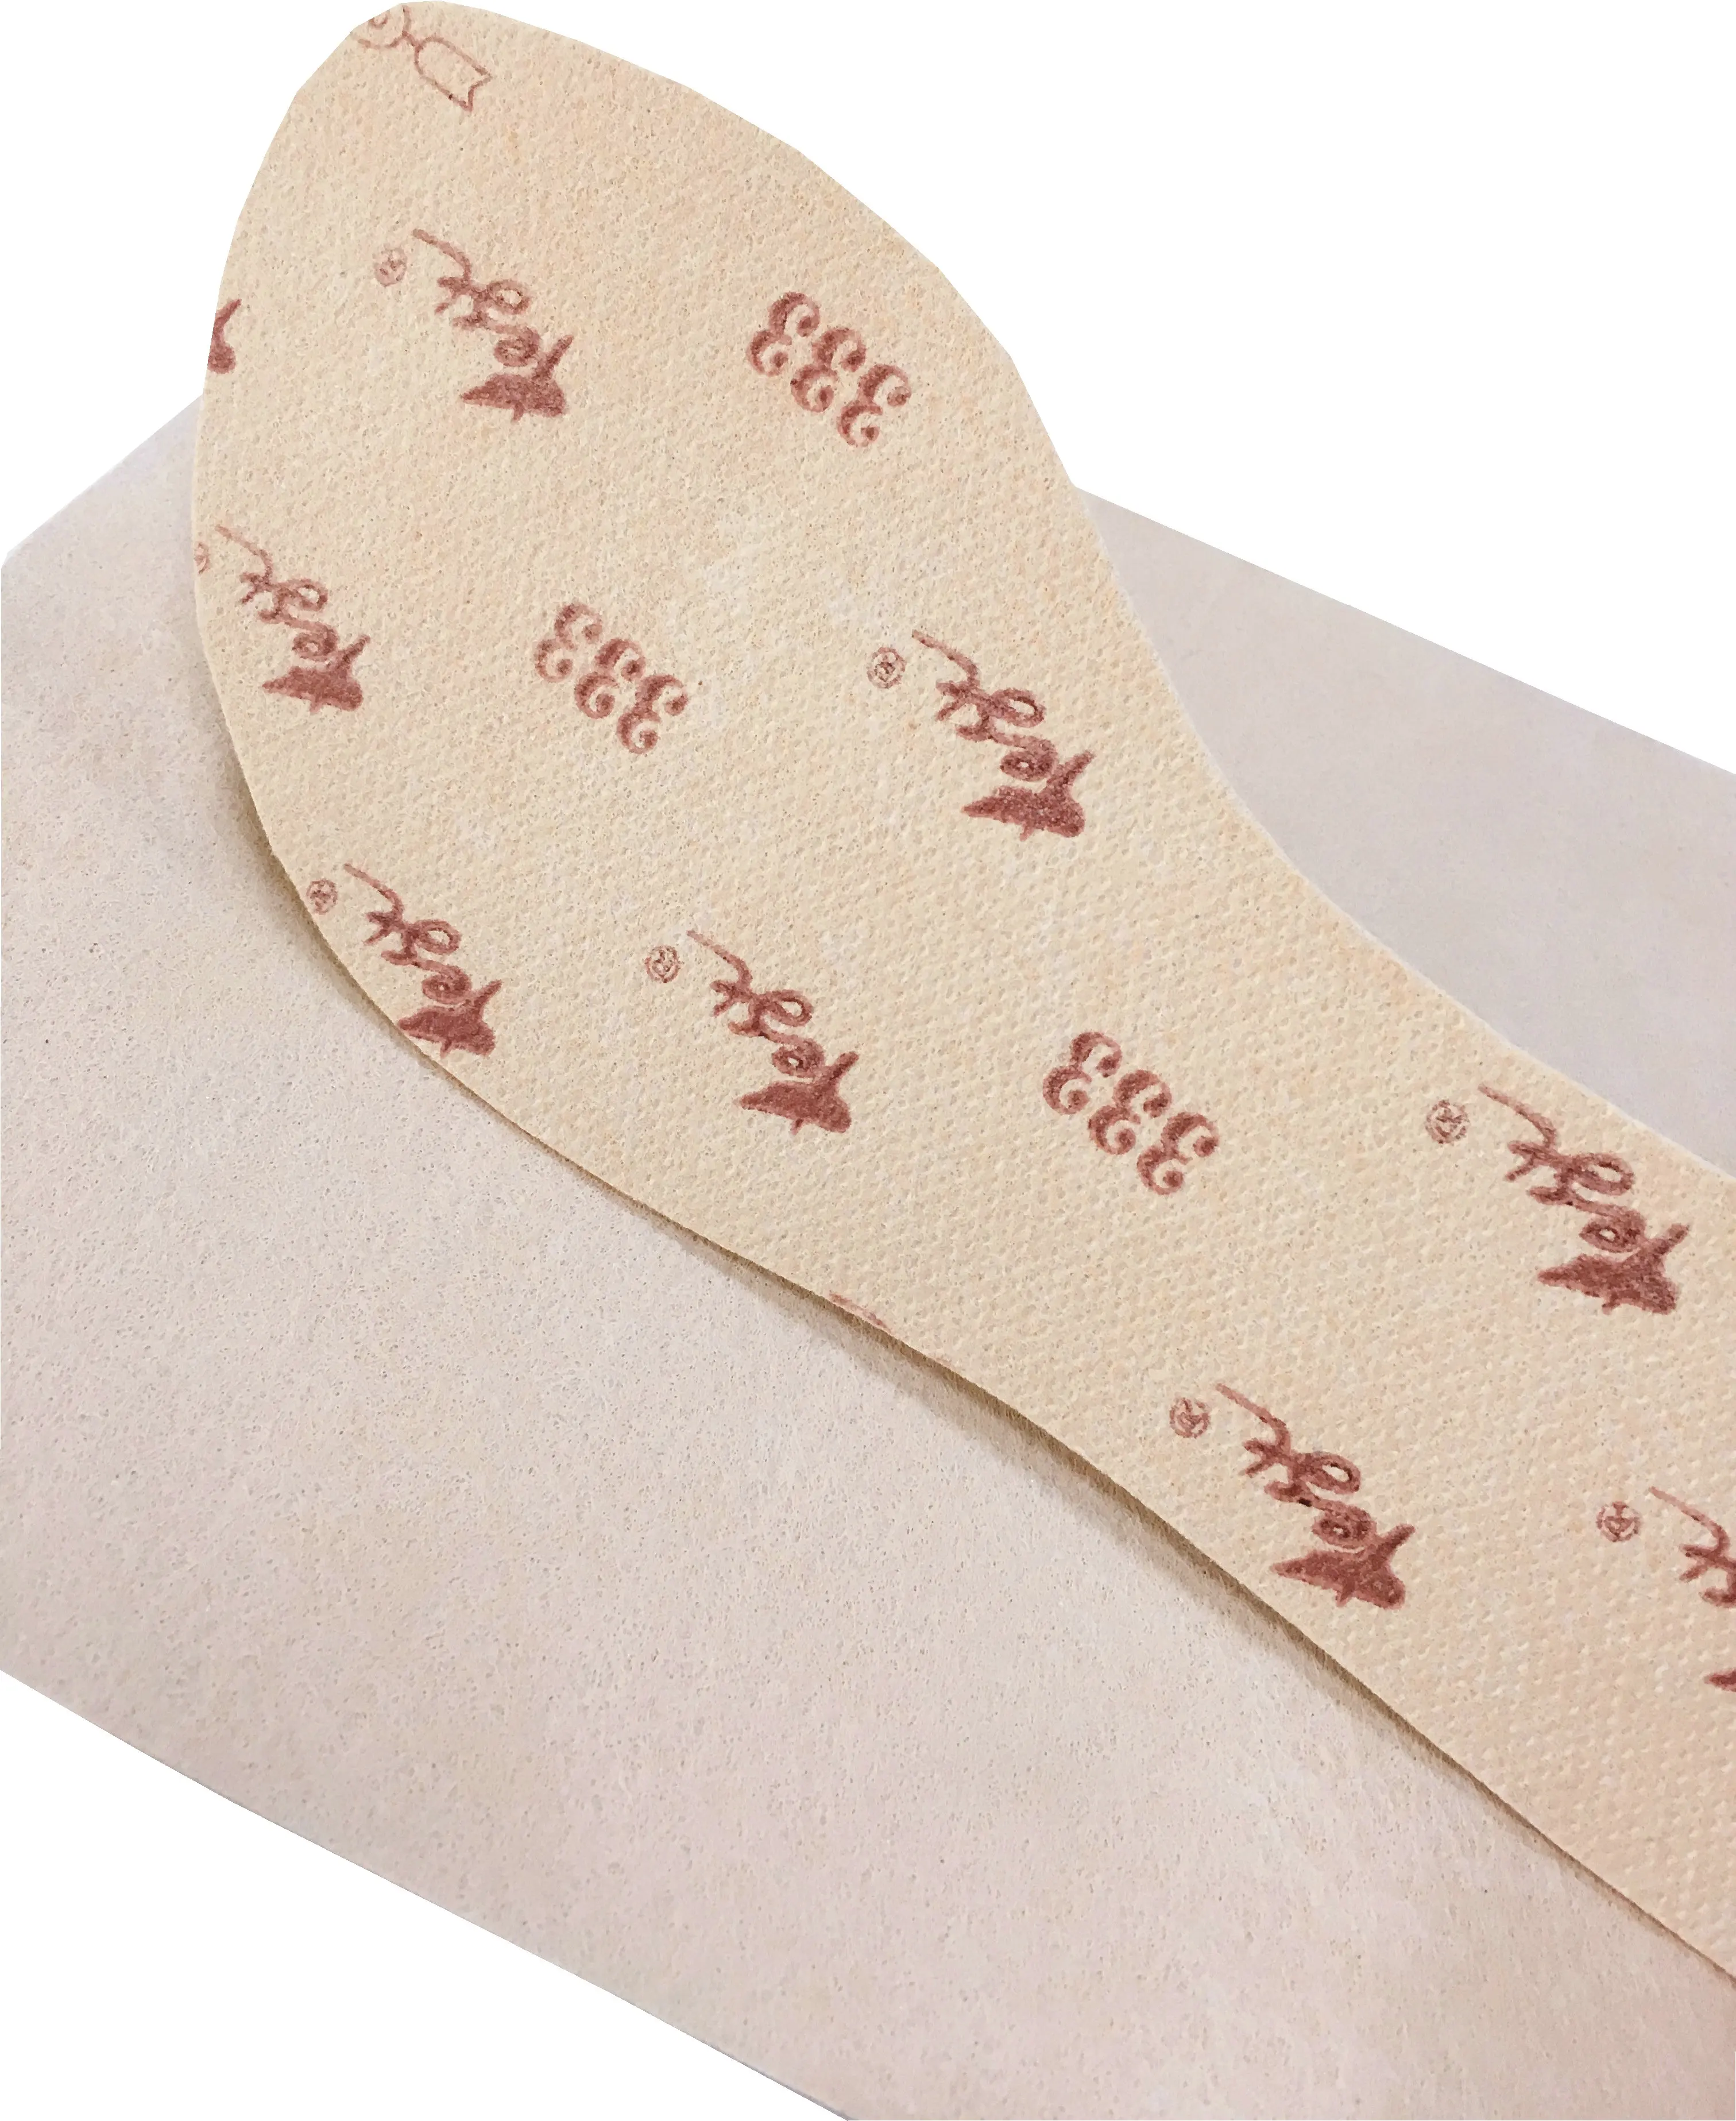 
Hot Sale Environment-friendly Shoes Material NonWoven Insole Board for Footwear 